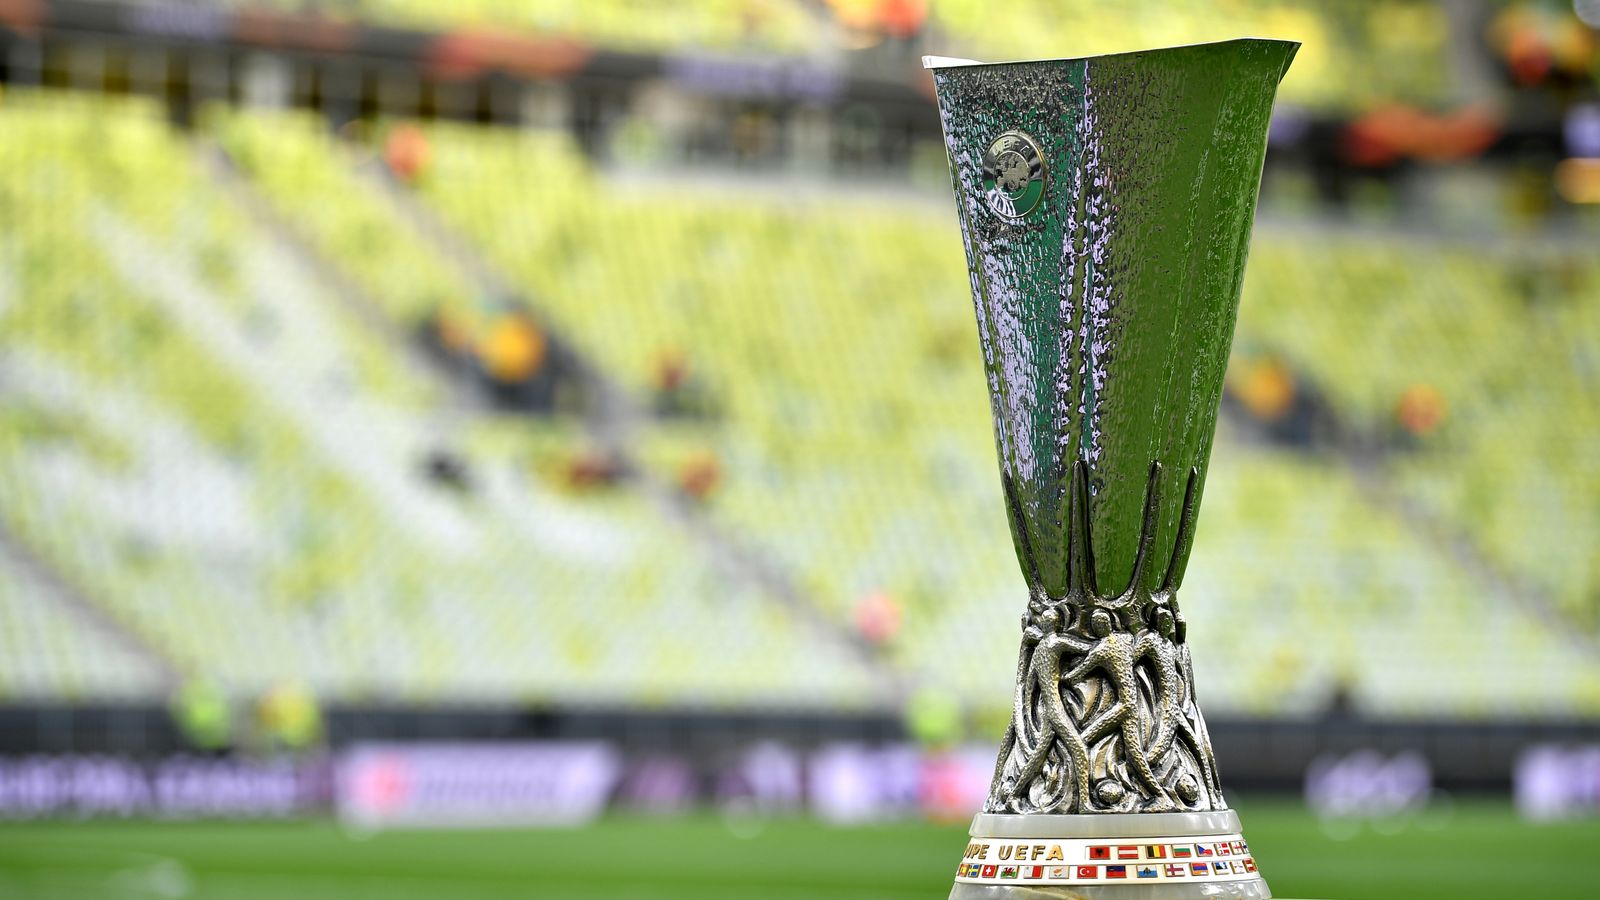 ARSENAL, JUVENTUS AND MANCHESTER UNITED ALL THROUGH TO THE LAST 16 OF THE EUROPA LEAGUE 